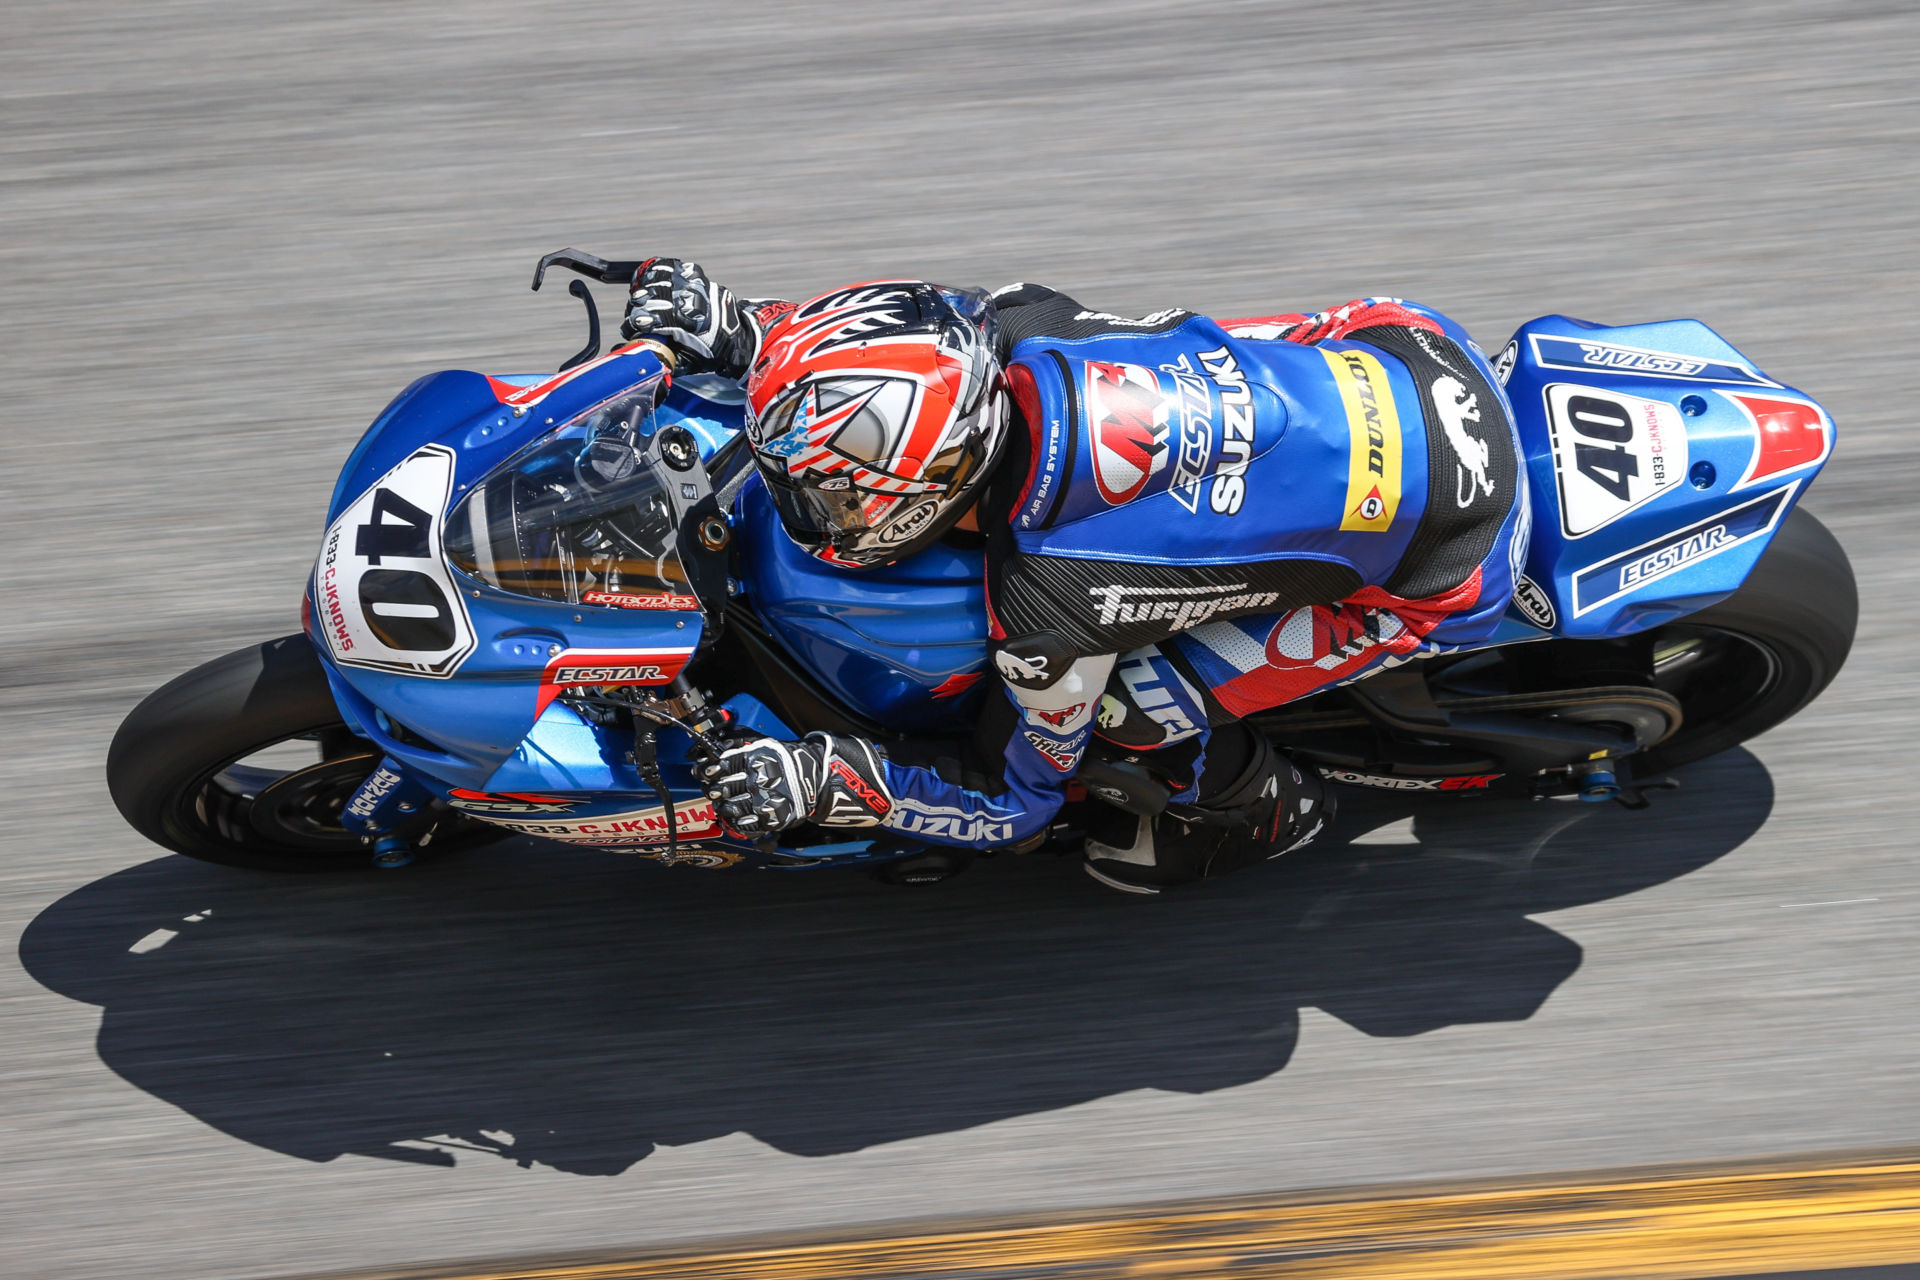 Sean Dylan Kelly (40) at speed on the banking at Daytona International Speedway. Photo by Brian J. Nelson.